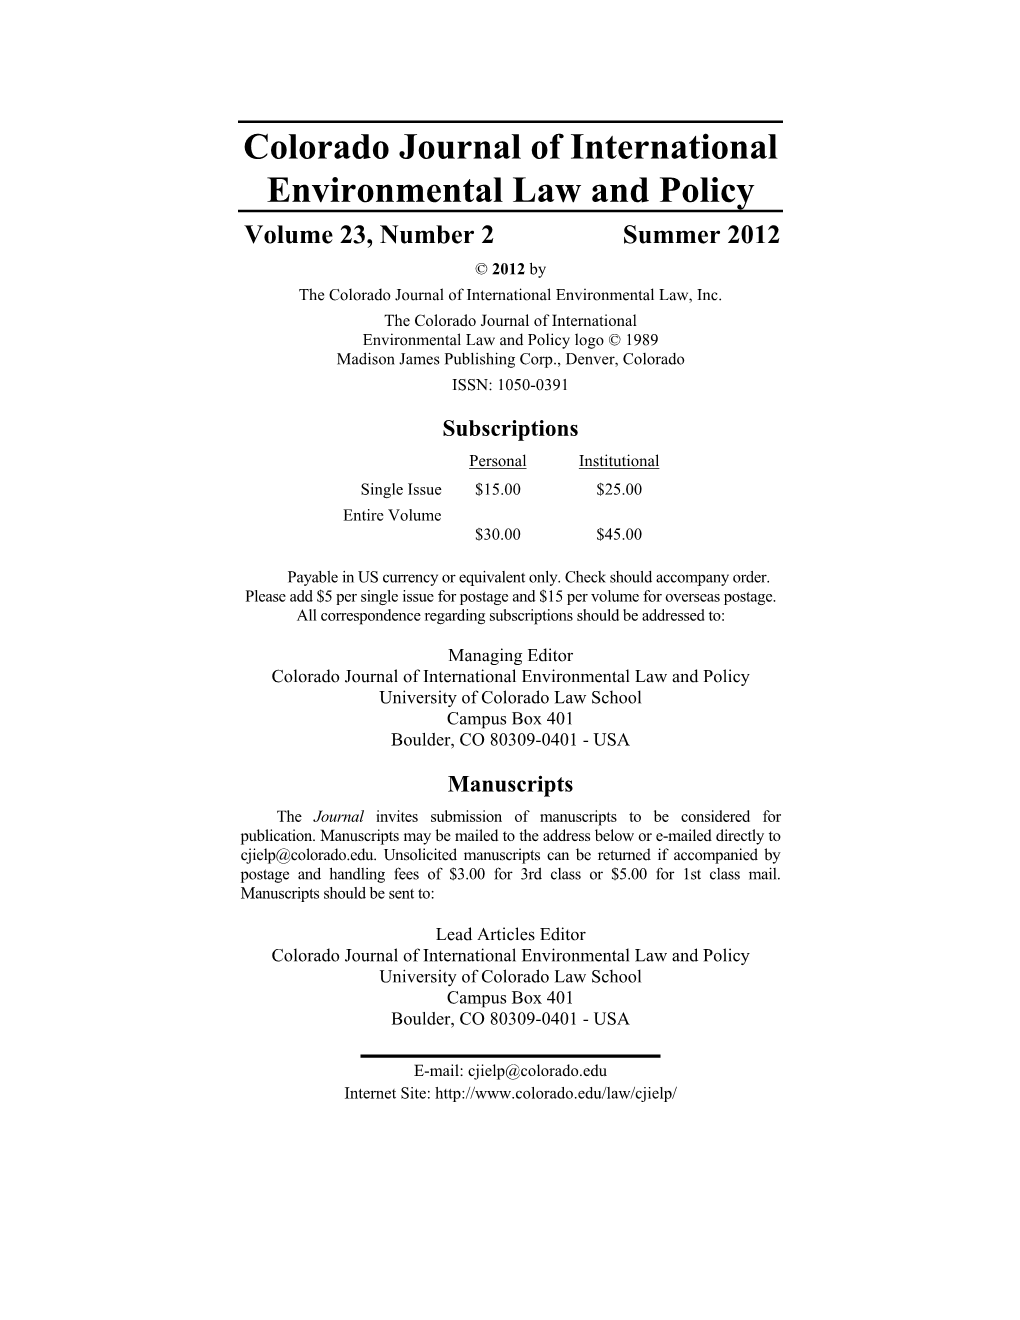 Colorado Journal of International Environmental Law and Policy Volume 23, Number 2 Summer 2012 © 2012 by the Colorado Journal of International Environmental Law, Inc